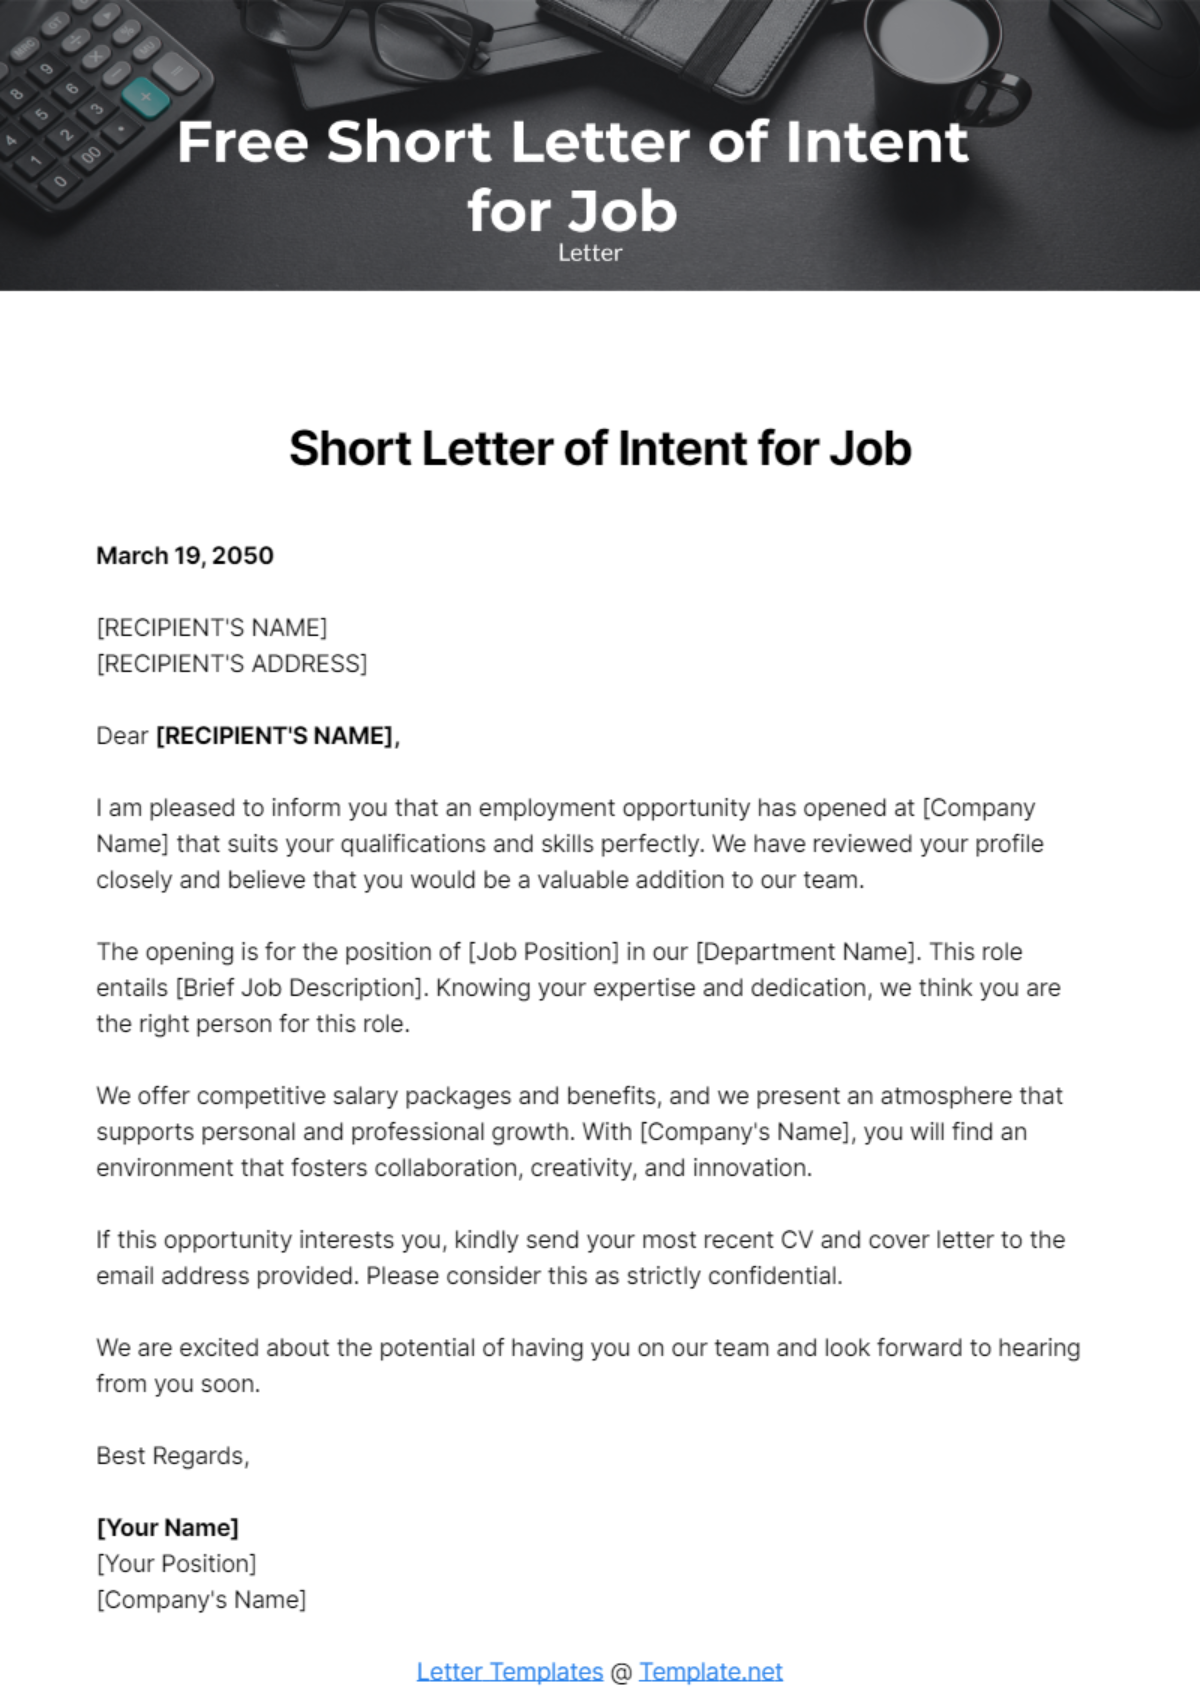 Short Letter of Intent for Job Template